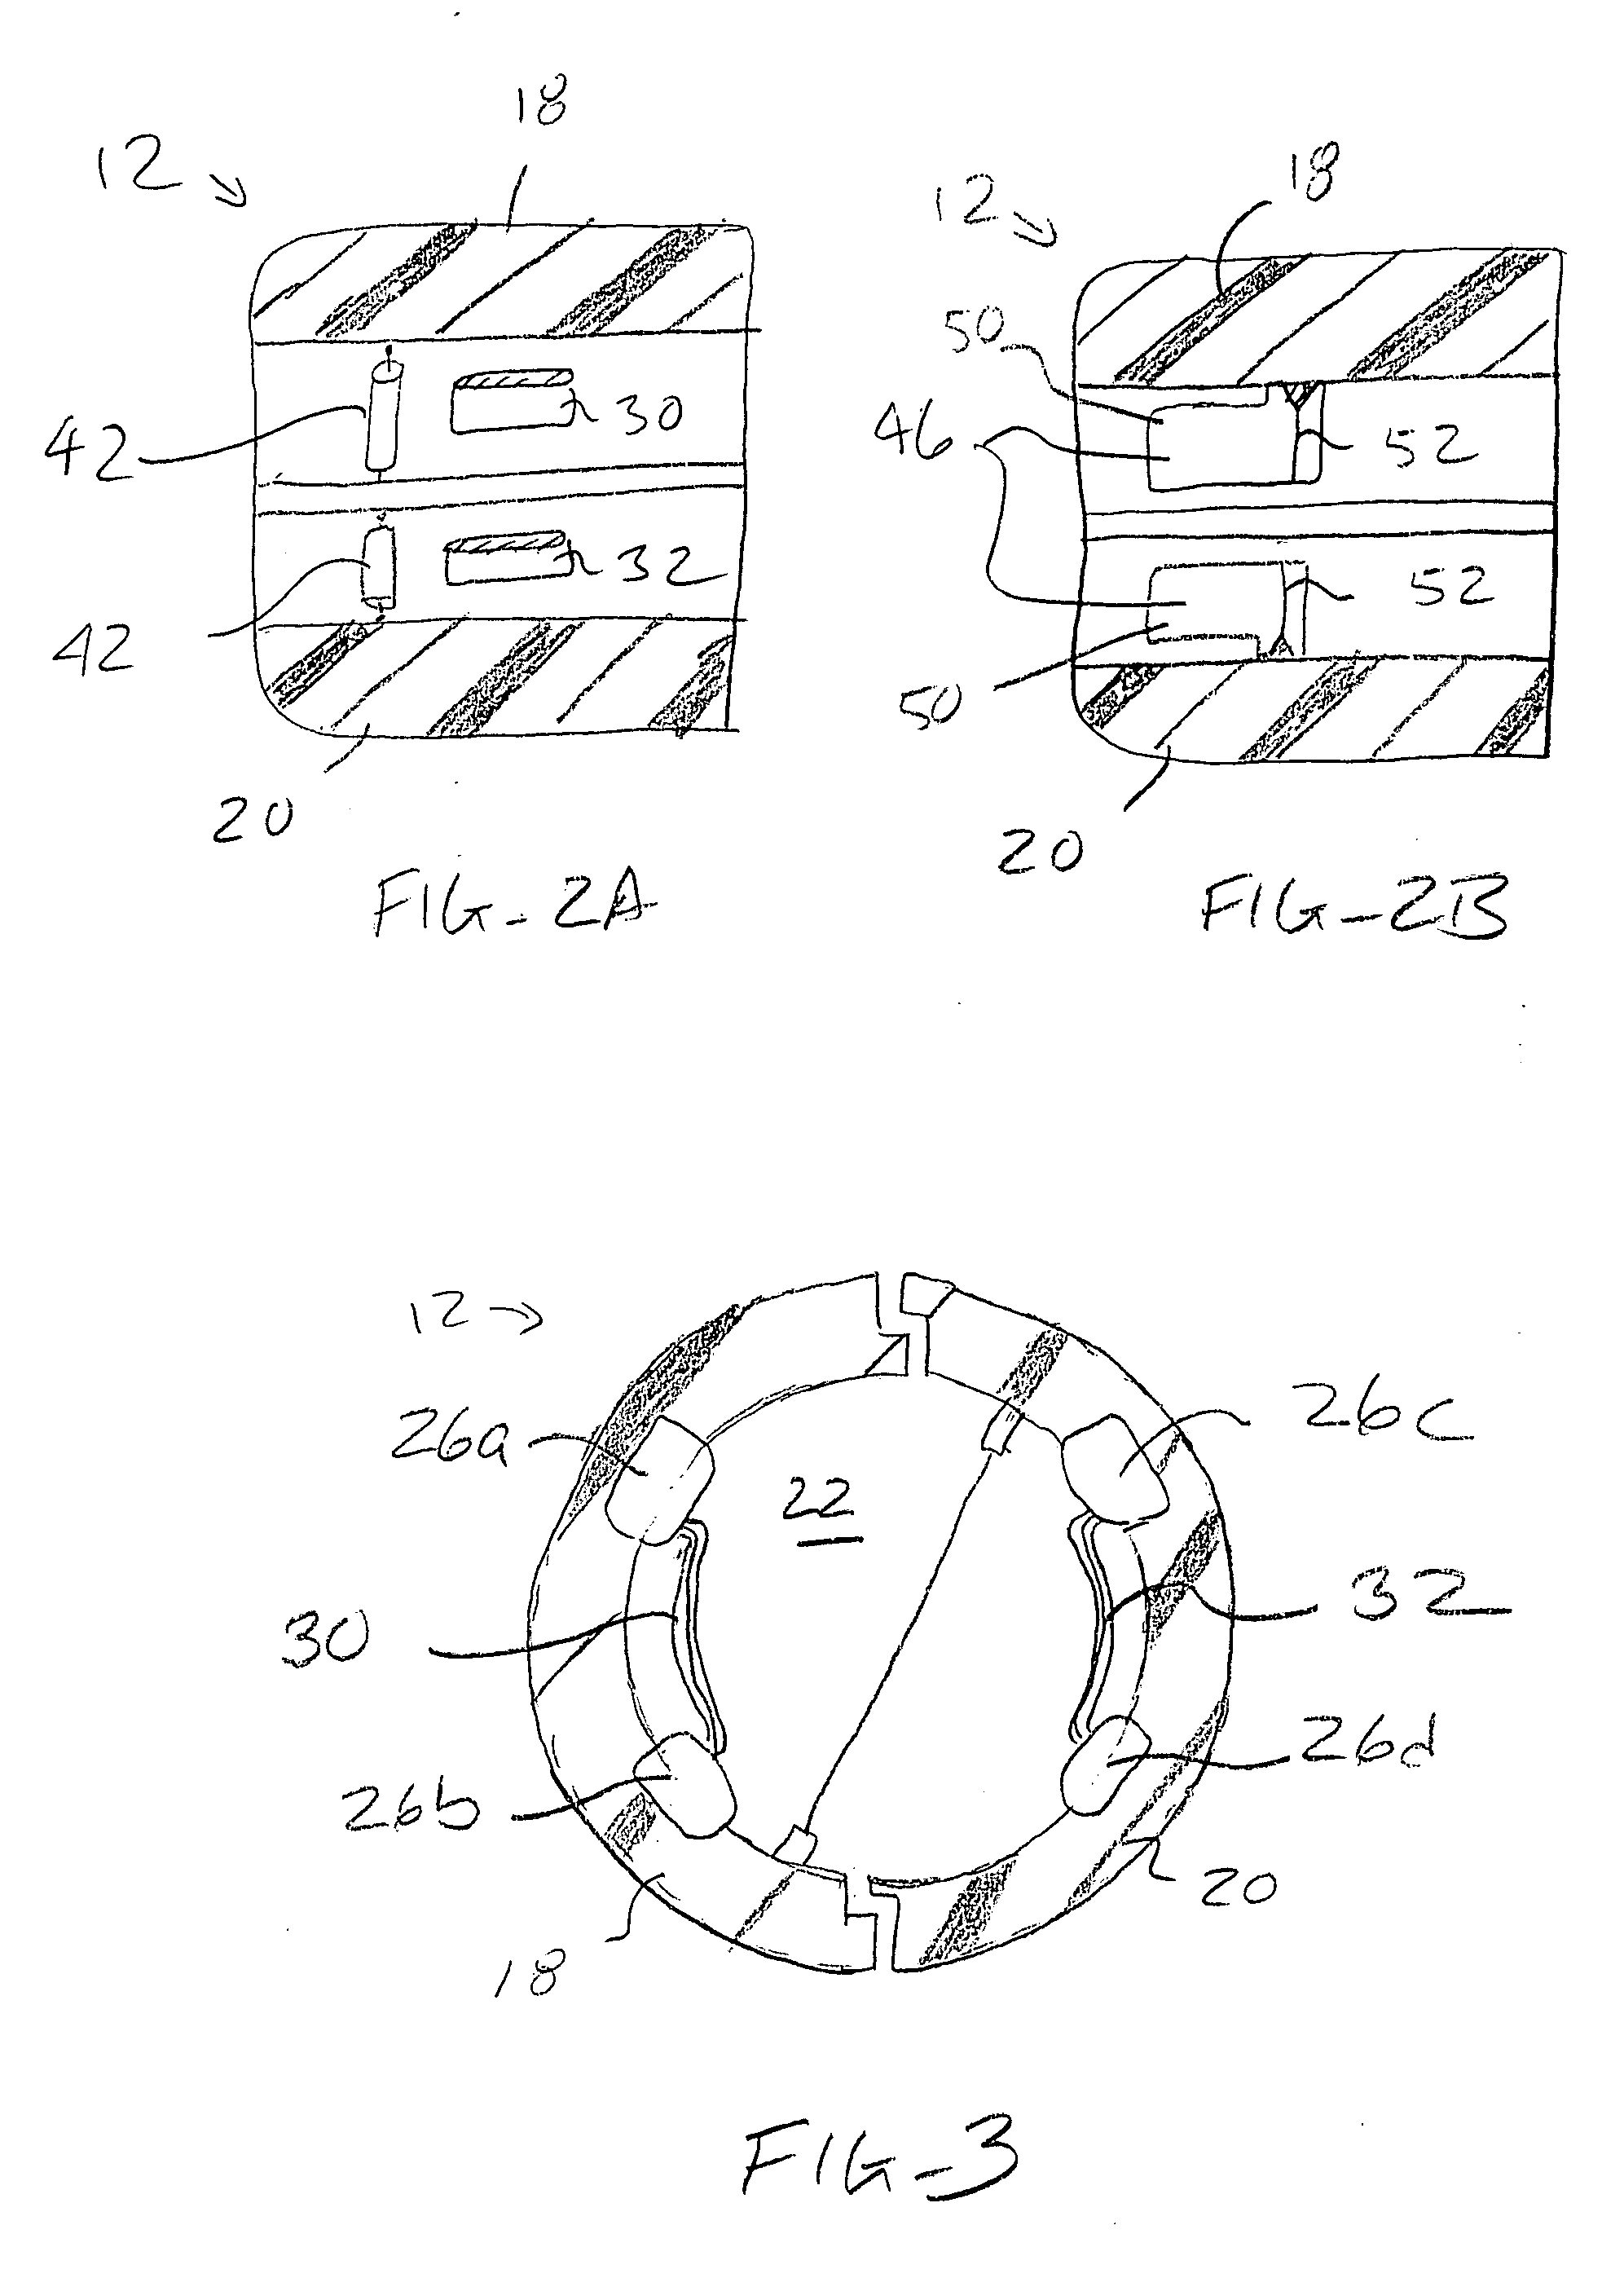 Assisted systems and methods for performing transvaginal hysterectomies